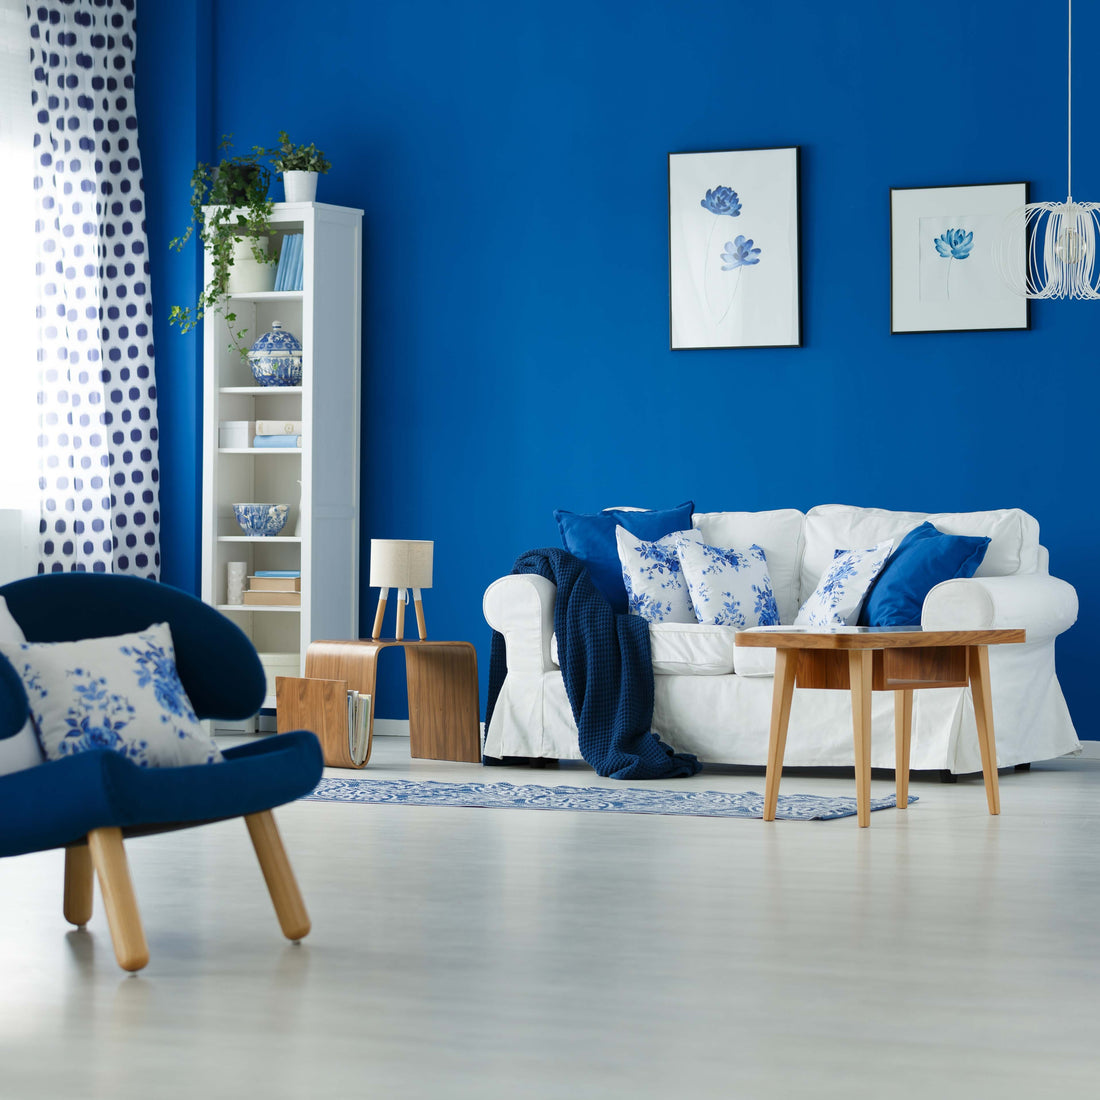 A room decorated in blue.